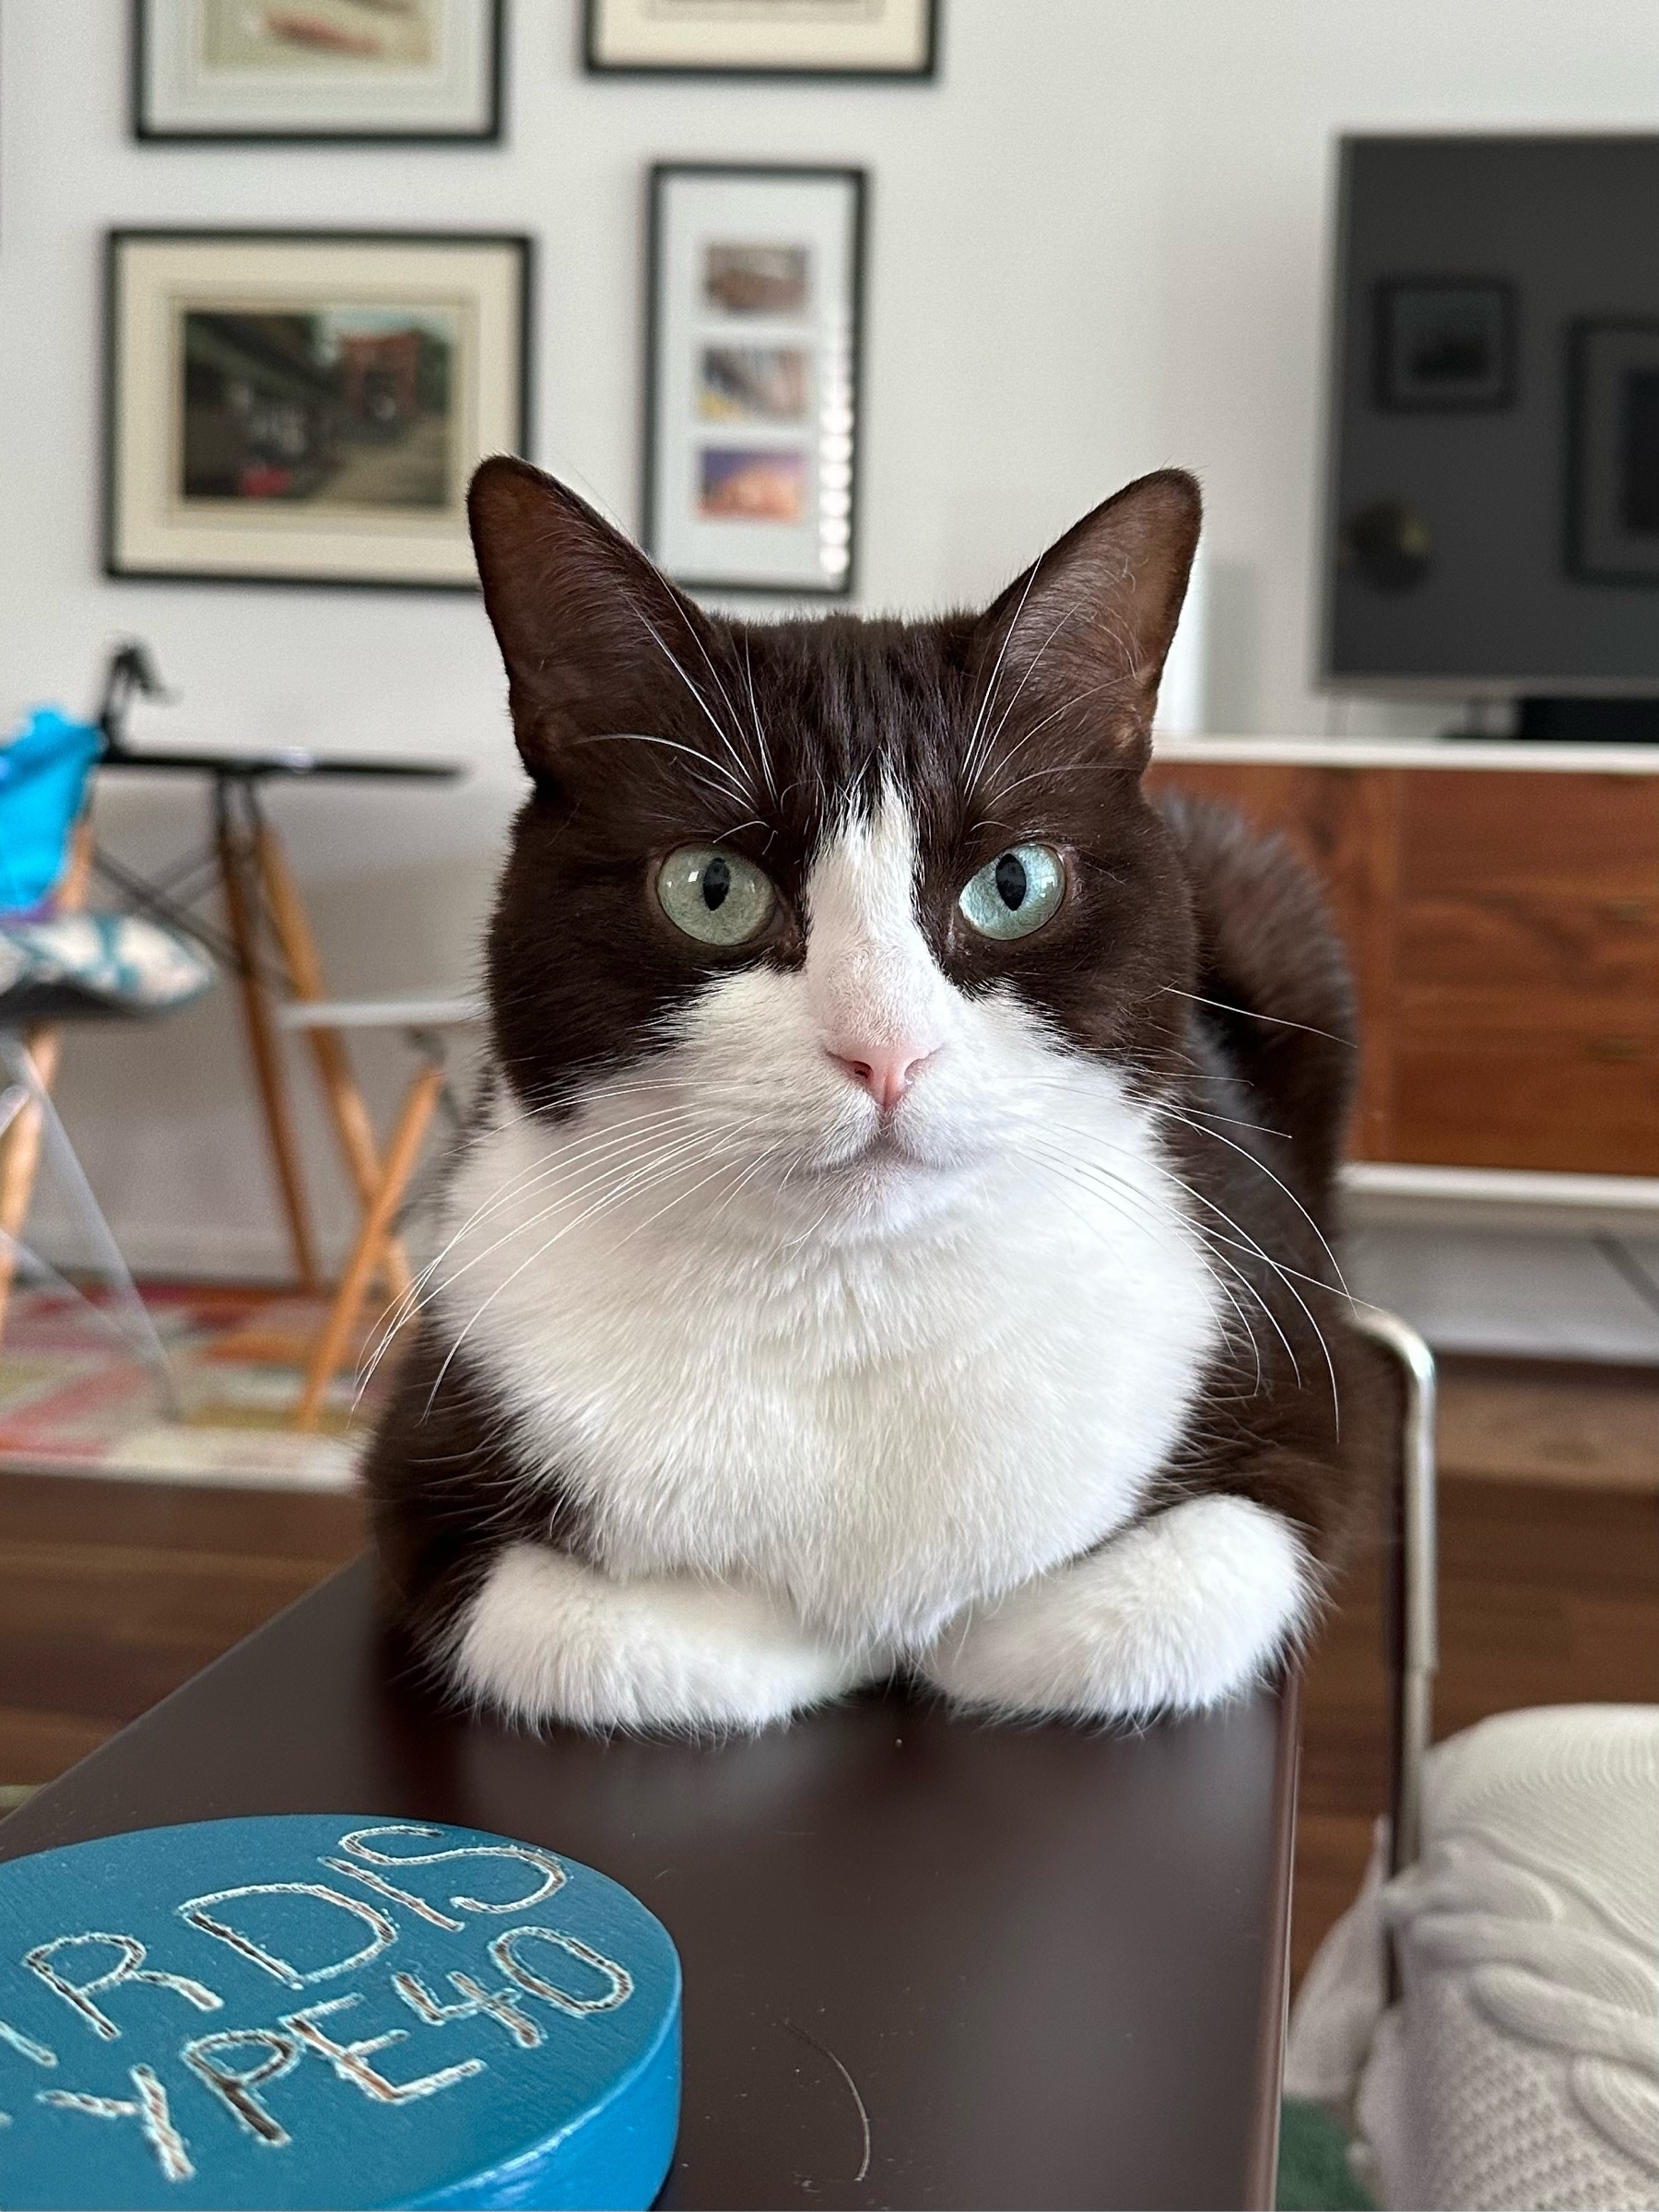 A black and white cat sitting looking straight on to the camera with front paws curled under their body. The cat has big ears and whiskers and has a black head but nose and under chin is white.